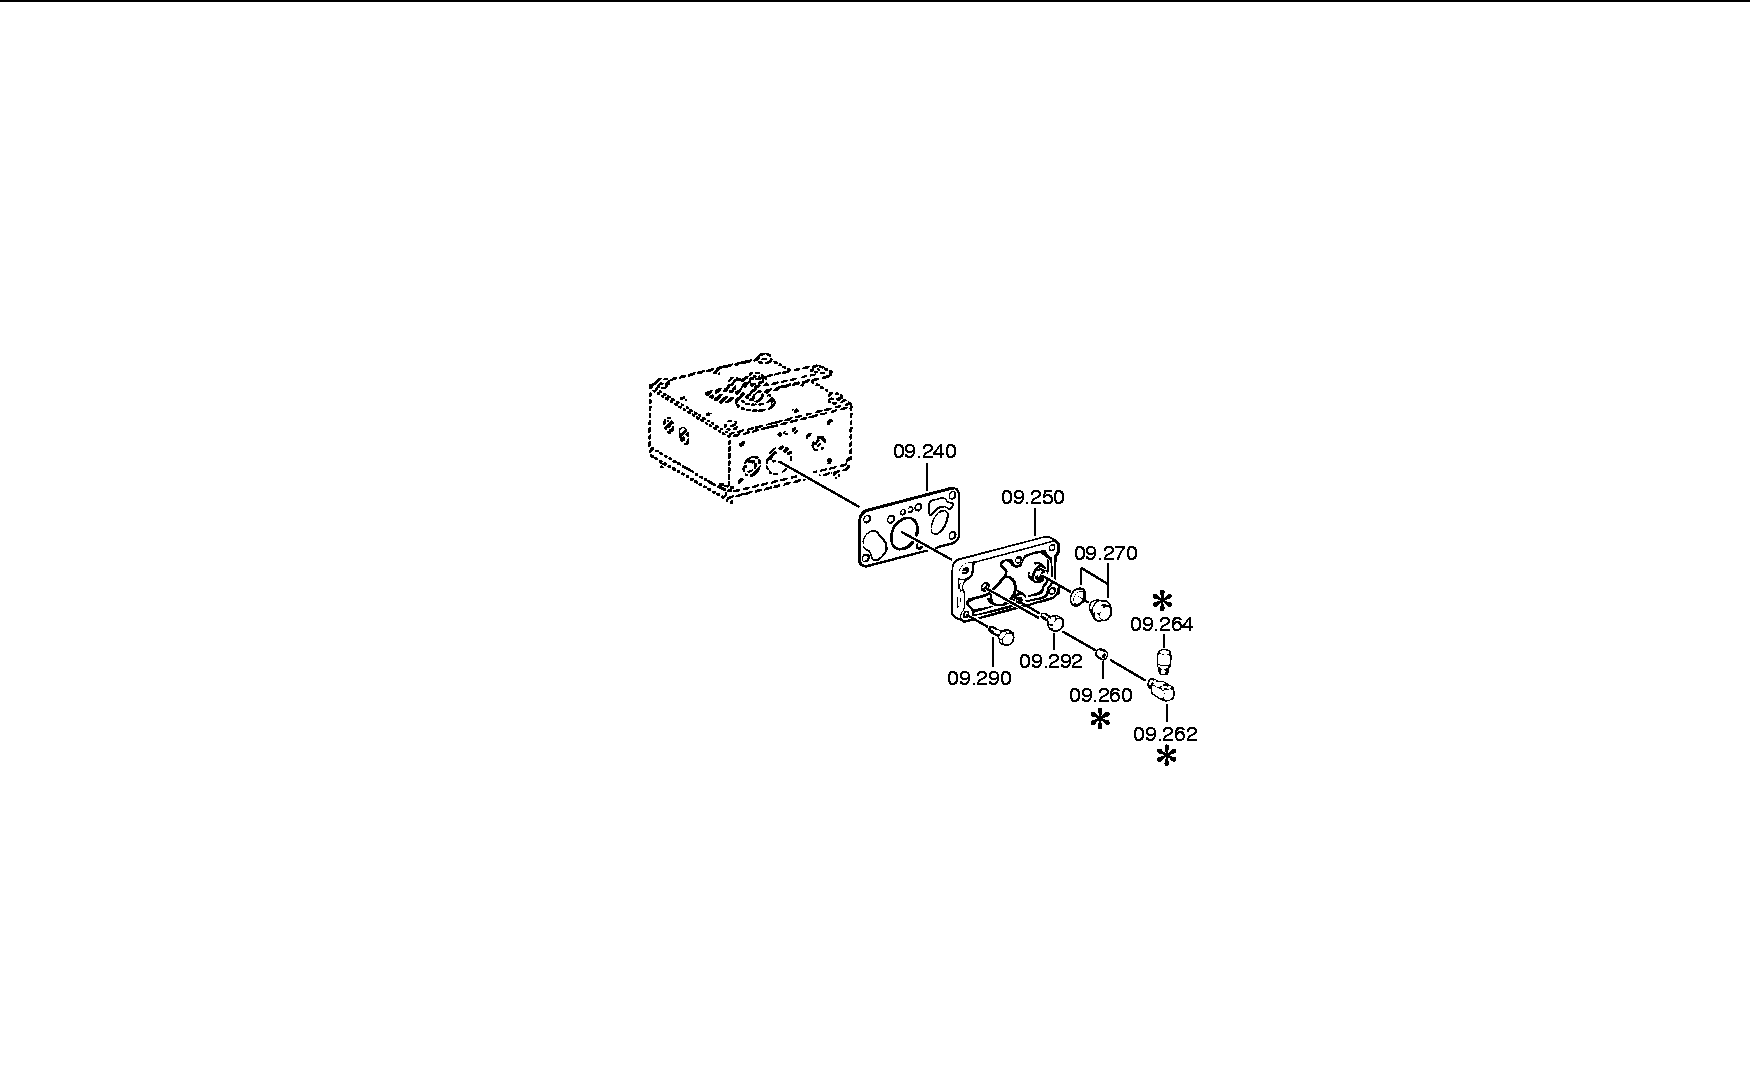 drawing for VOITH-GETRIEBE KG 01.0286.88 - SCREW PLUG (figure 2)